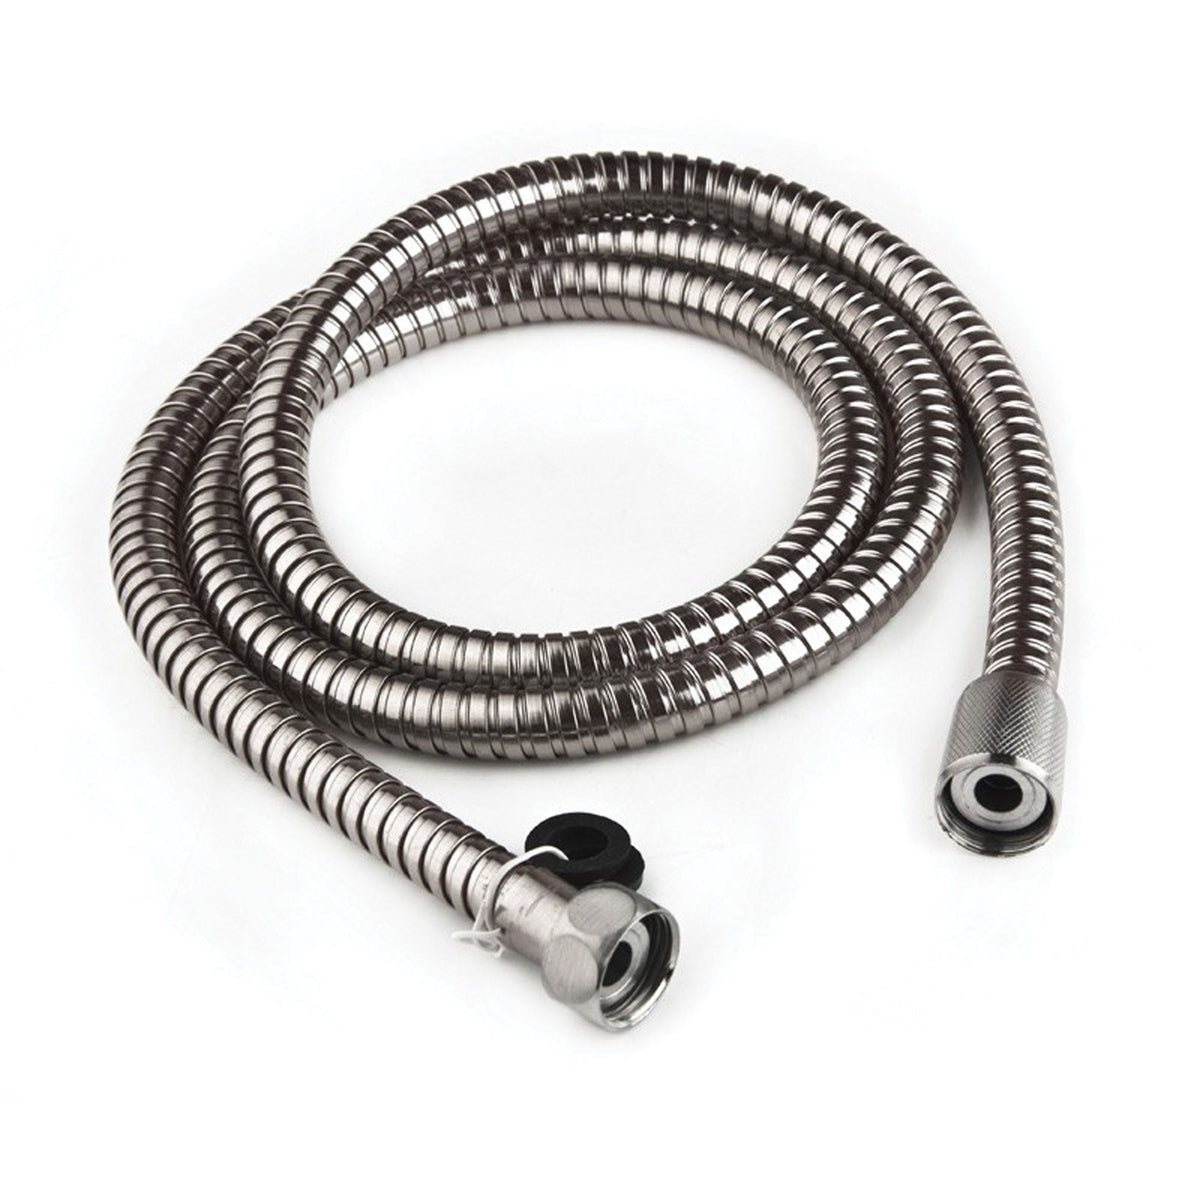 Dura Faucet 60" Stainless Steel RV Shower Hose - Brushed Satin Nickel